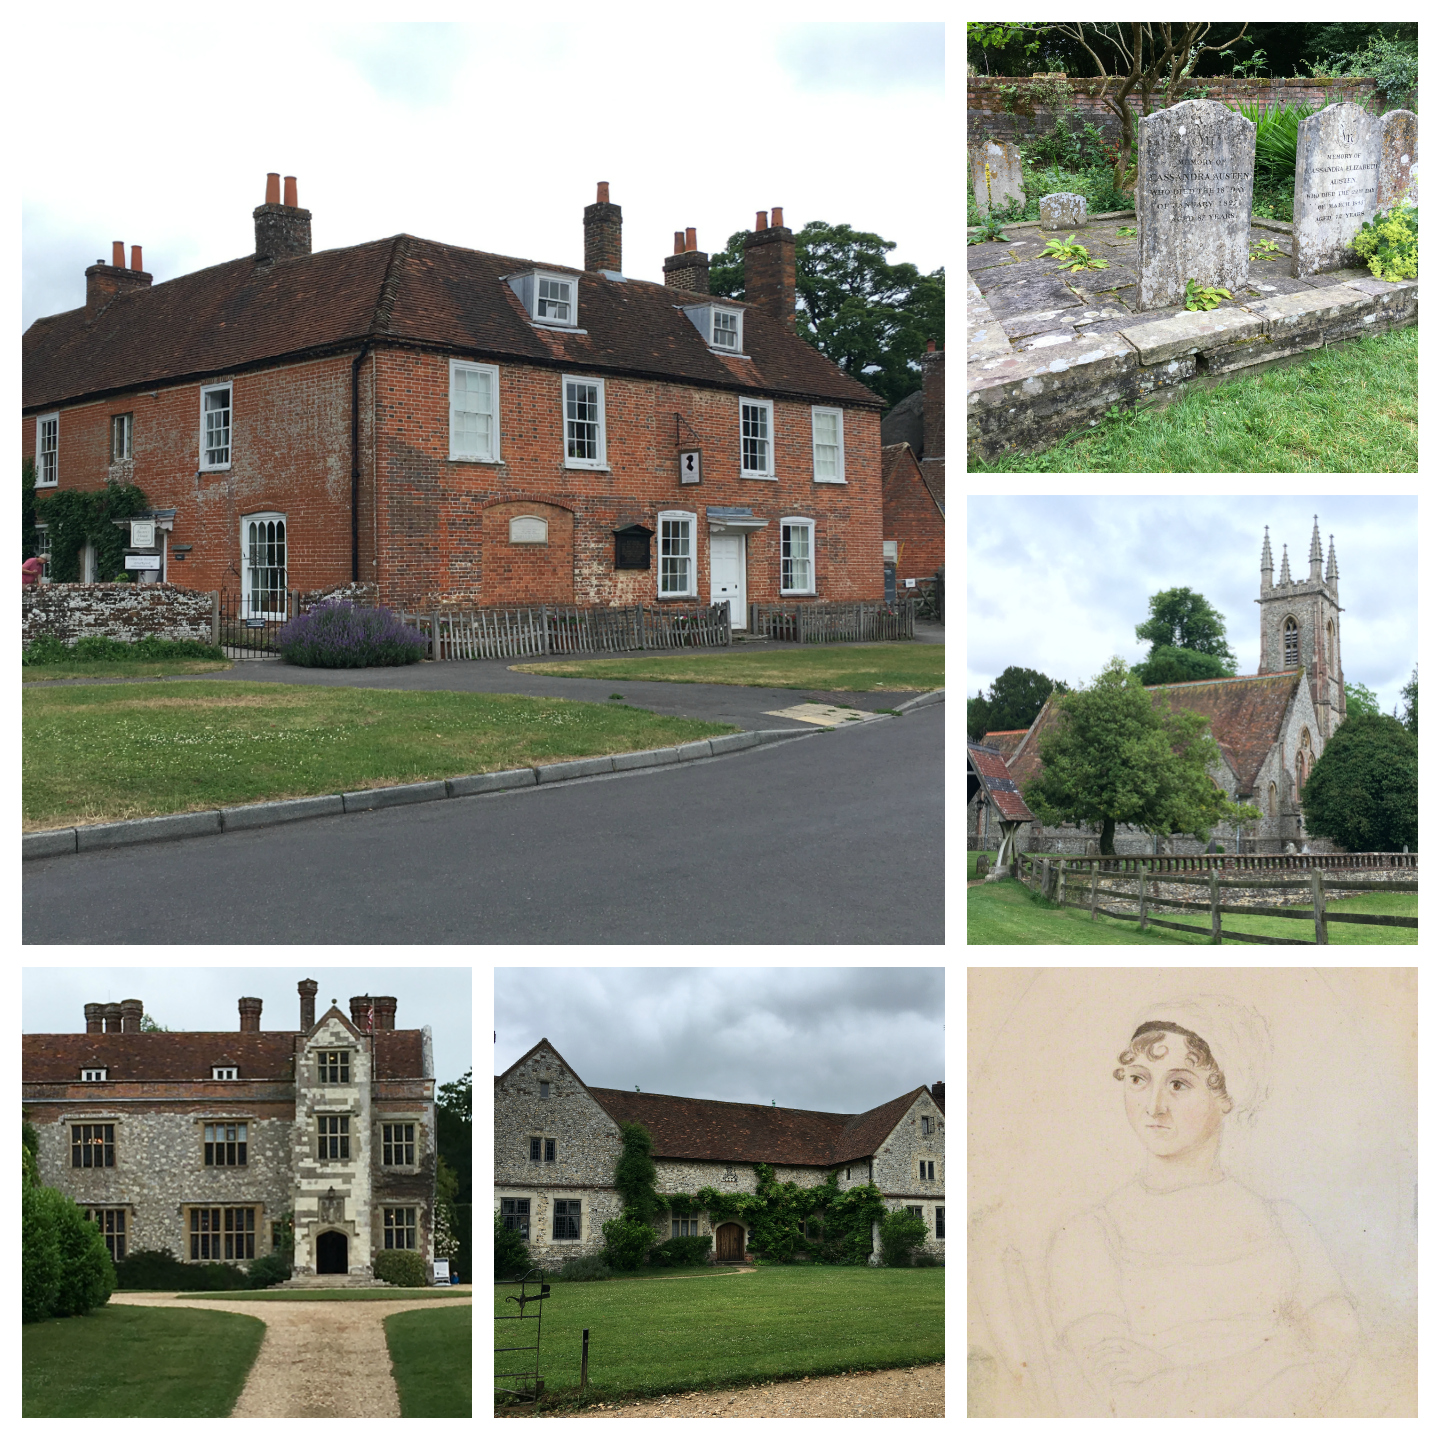 Collage of images from Chawton including the church, the Jane Austen House Museum, the graves of her sister and mother and an image of Jane Austen as drawn by her sister